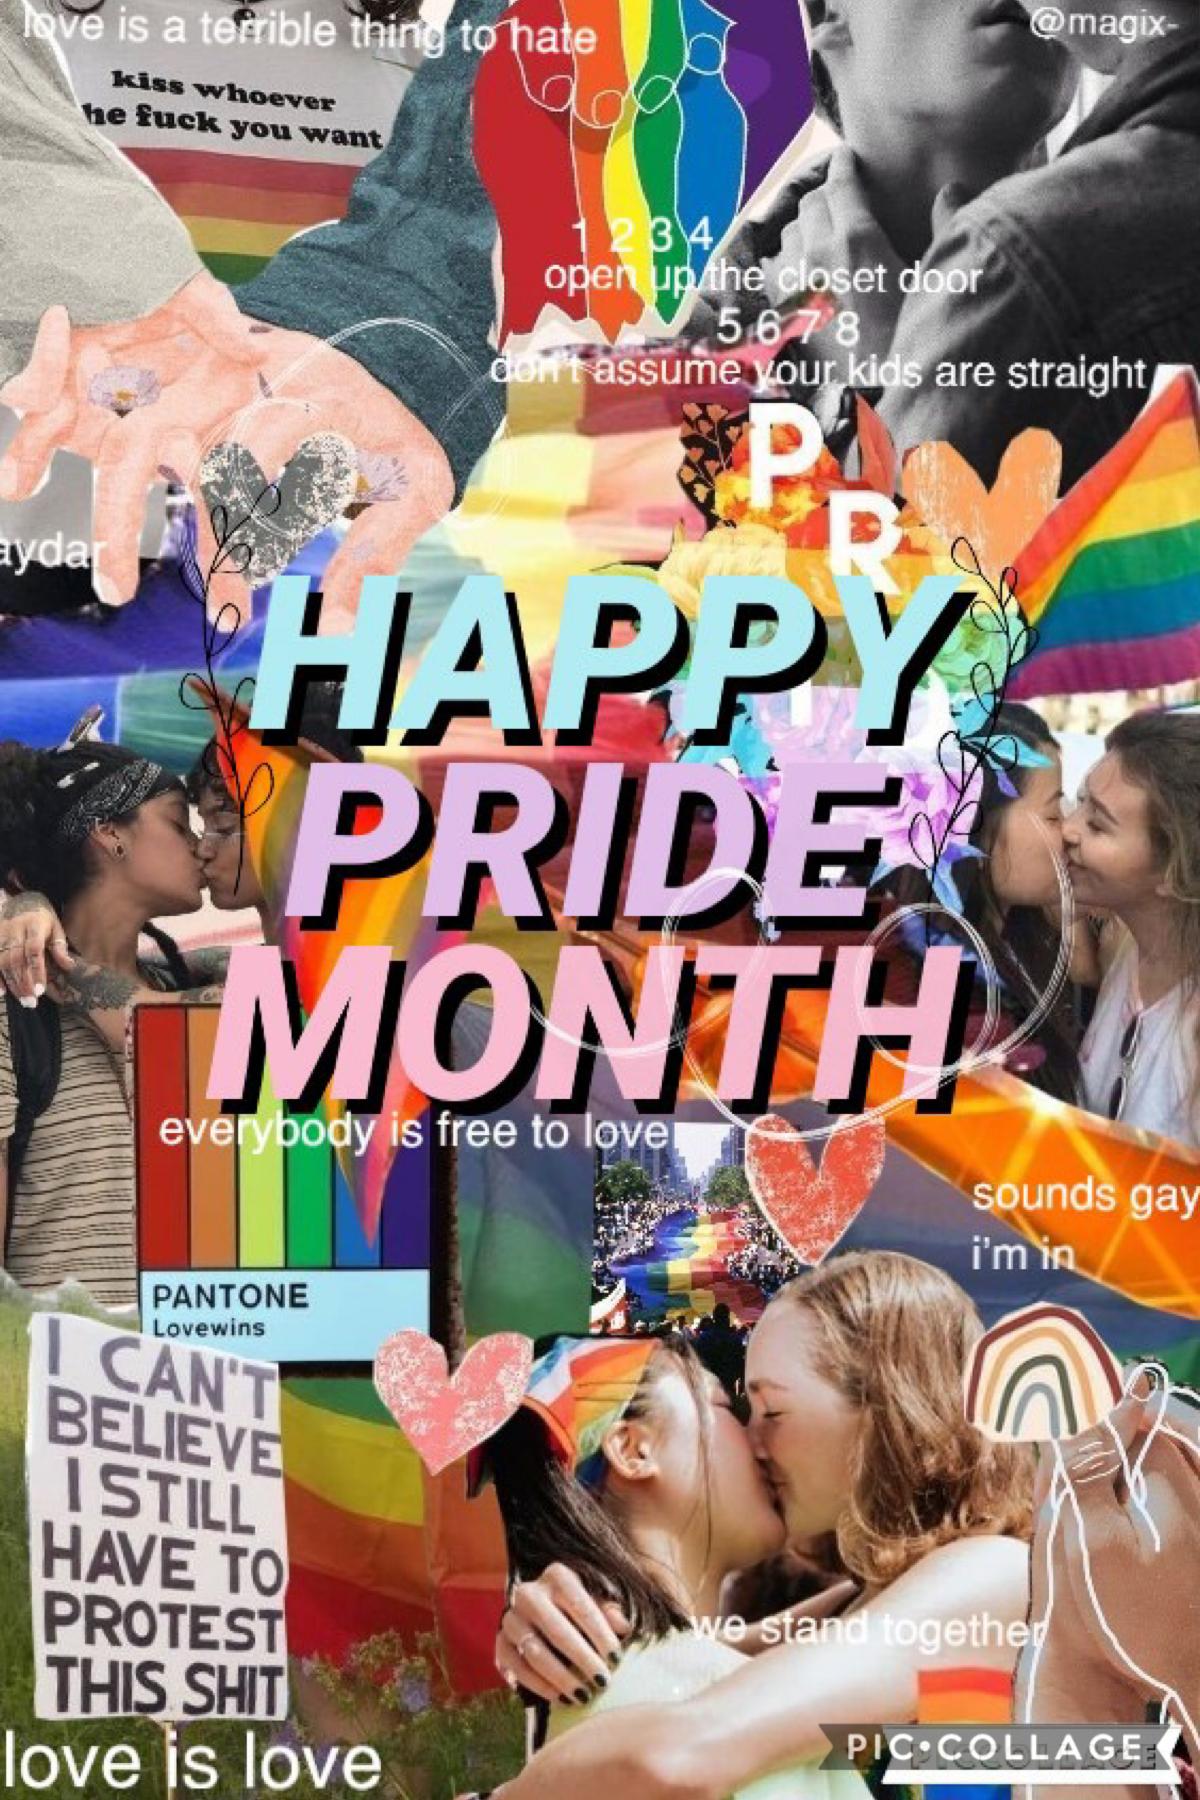 Happy pride 🌈 inspired by em
30.6.20